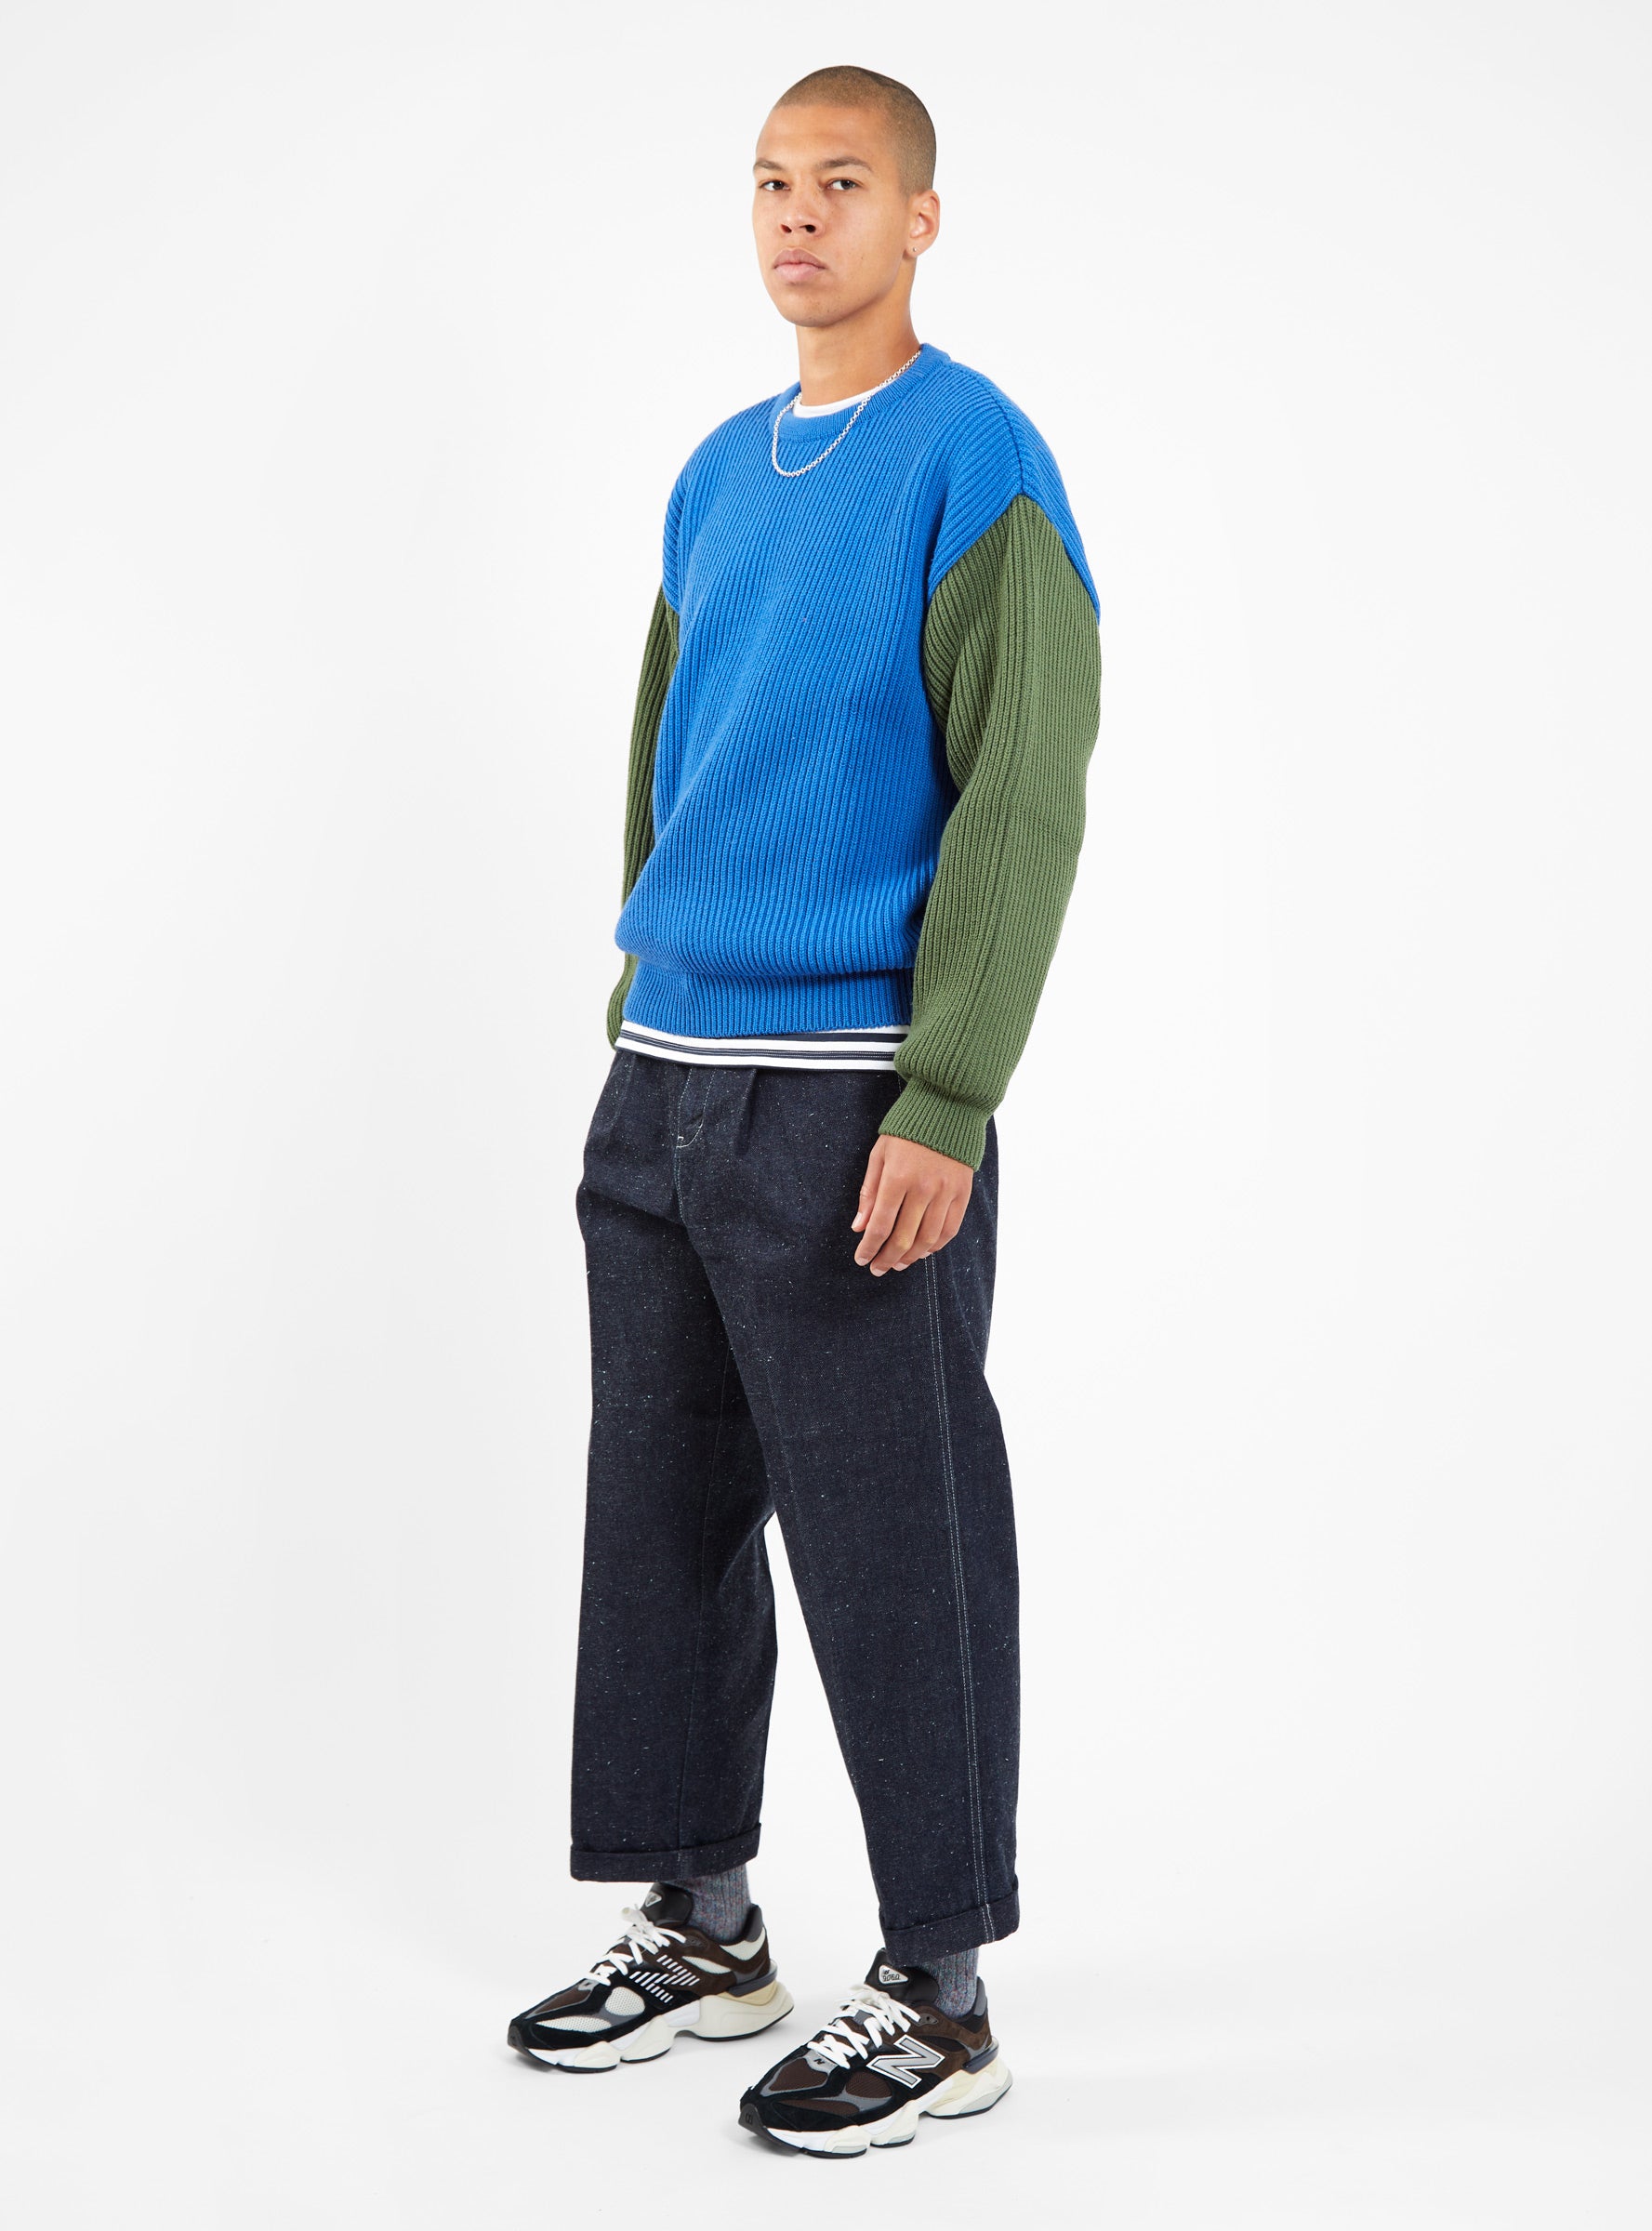 Beacon Merino Wool Crew Sweater Royal Blue & Olive by The English ...